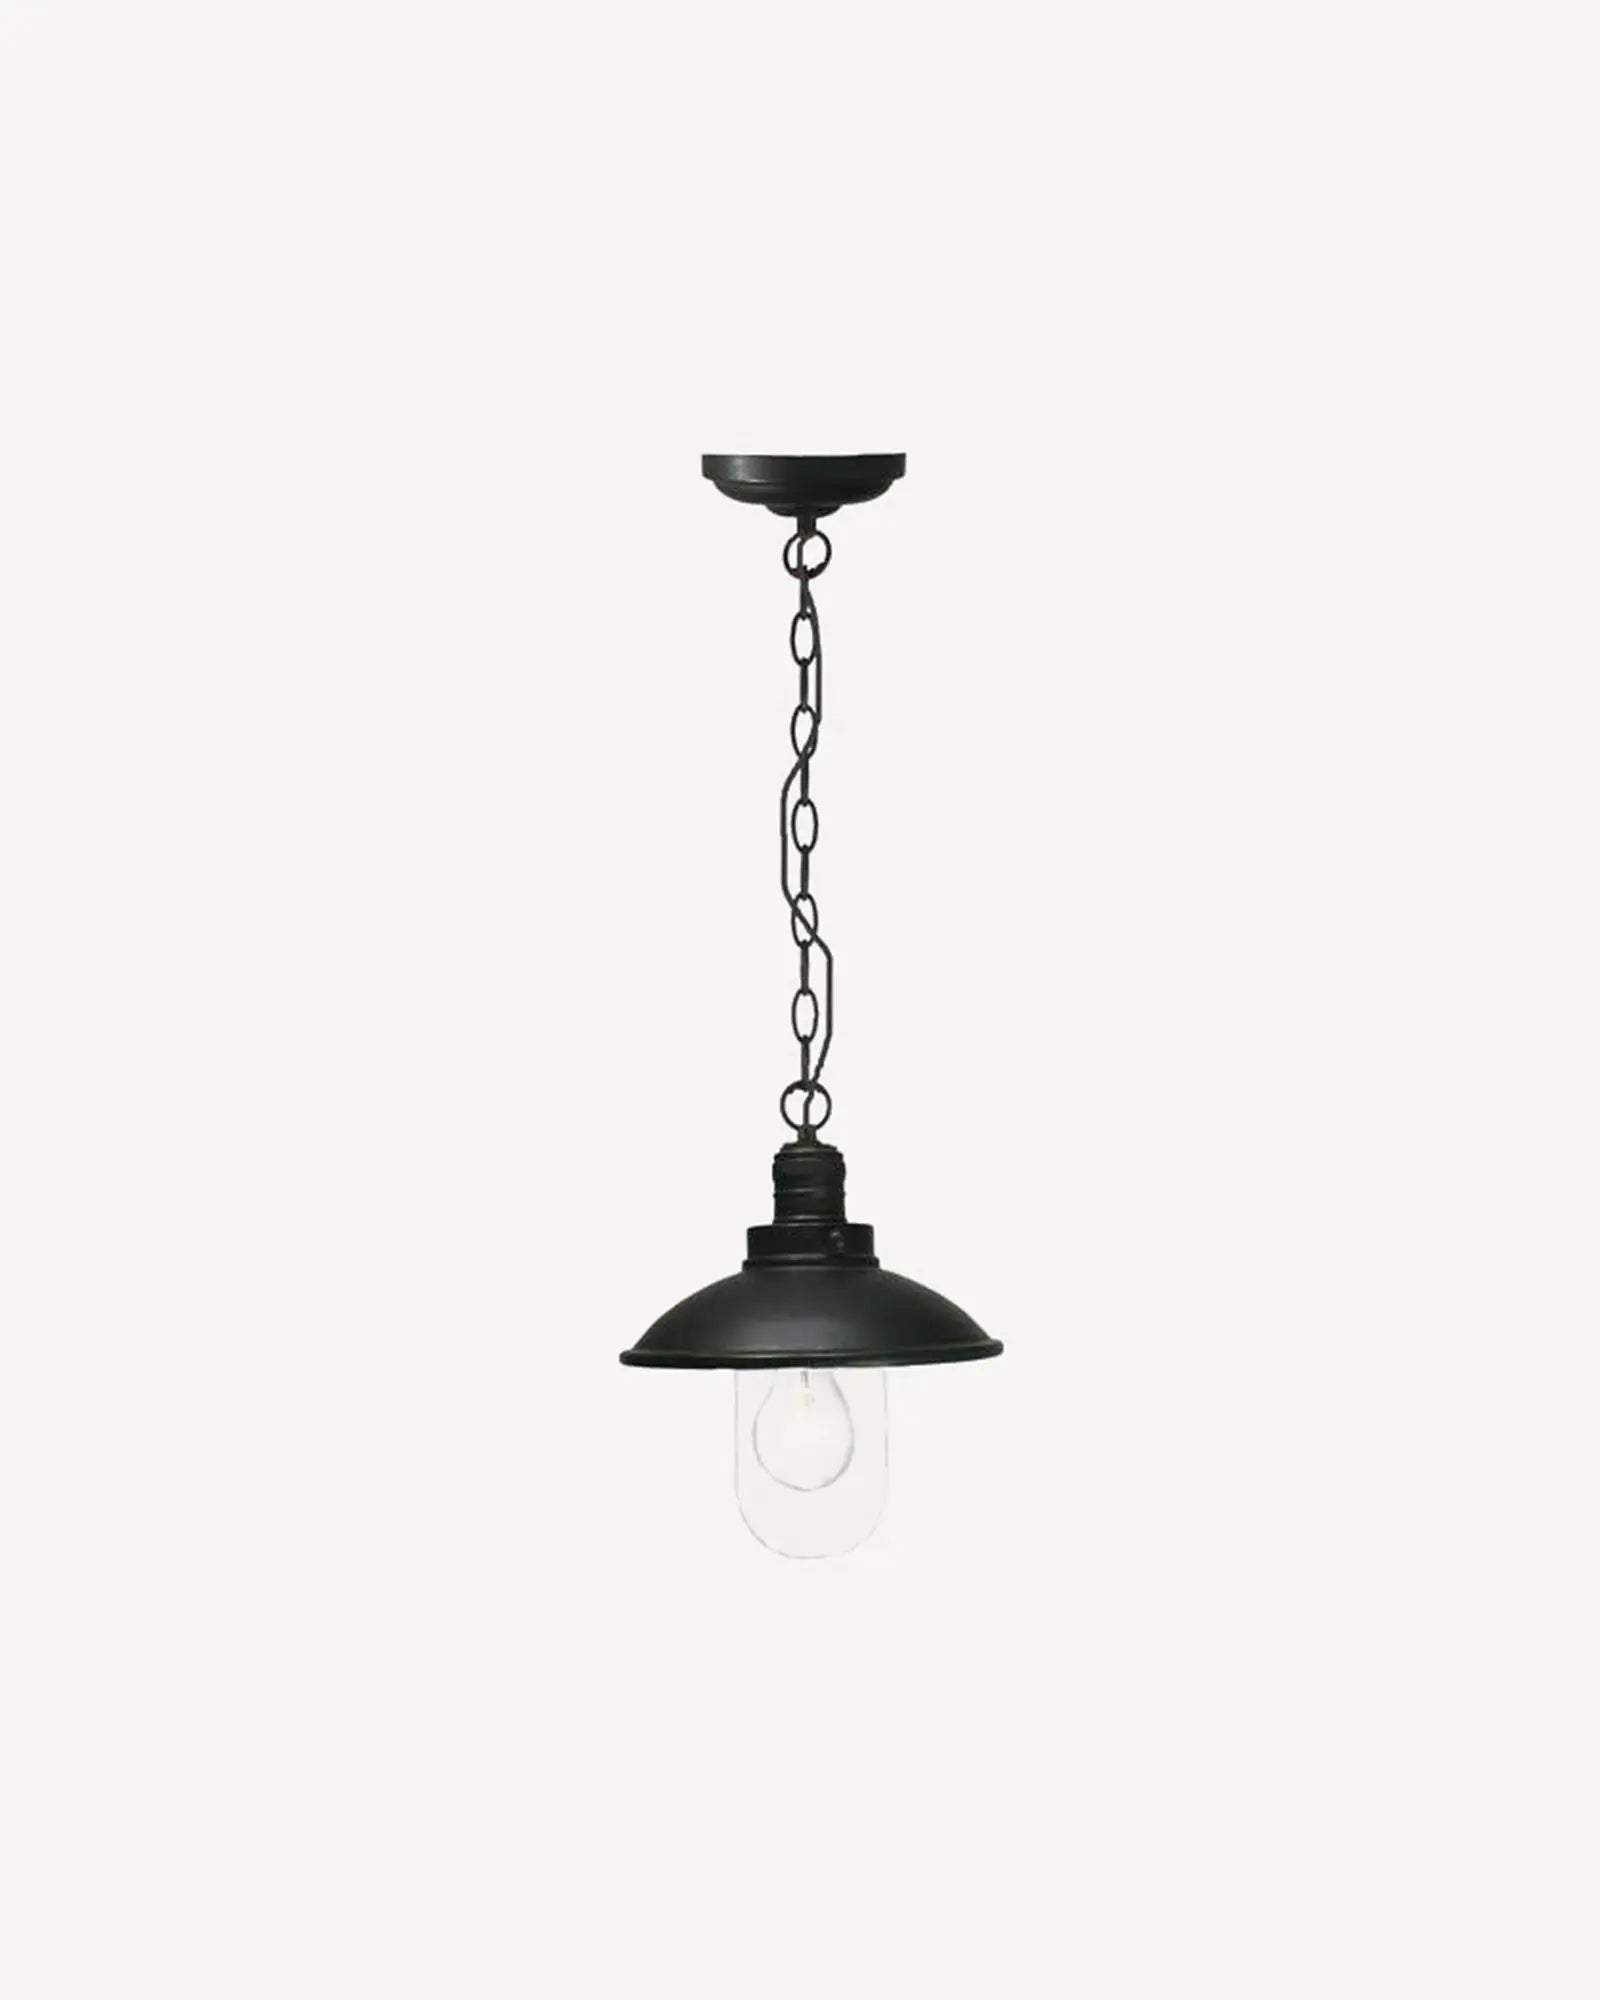 Port Chain Pendant by Inspiration Light at Nook Collections